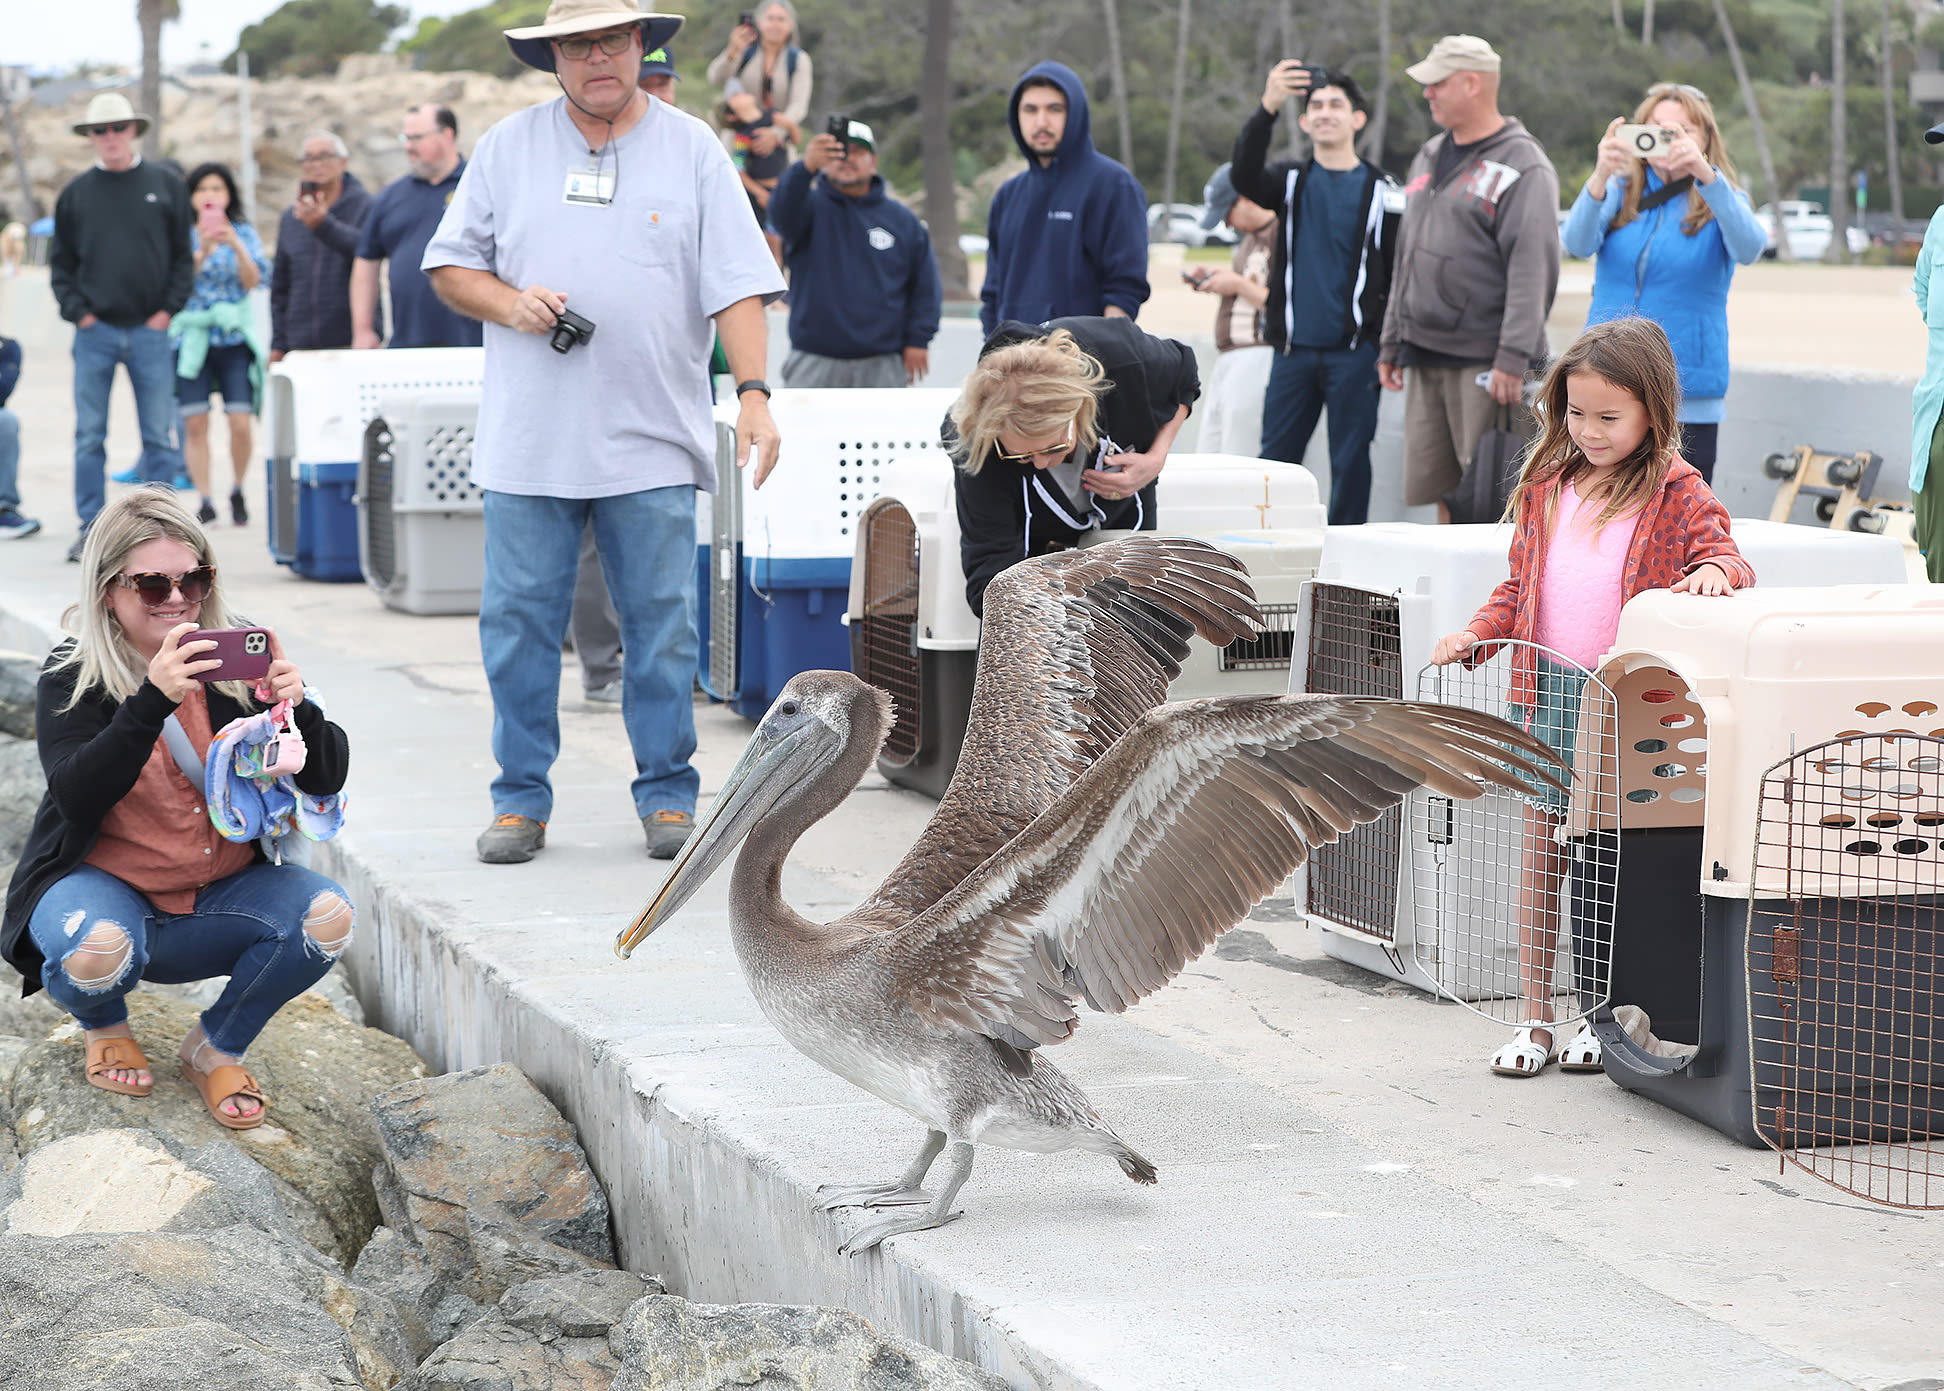 10 down, 100 to go — brown pelicans released in Newport Beach after mass starvation